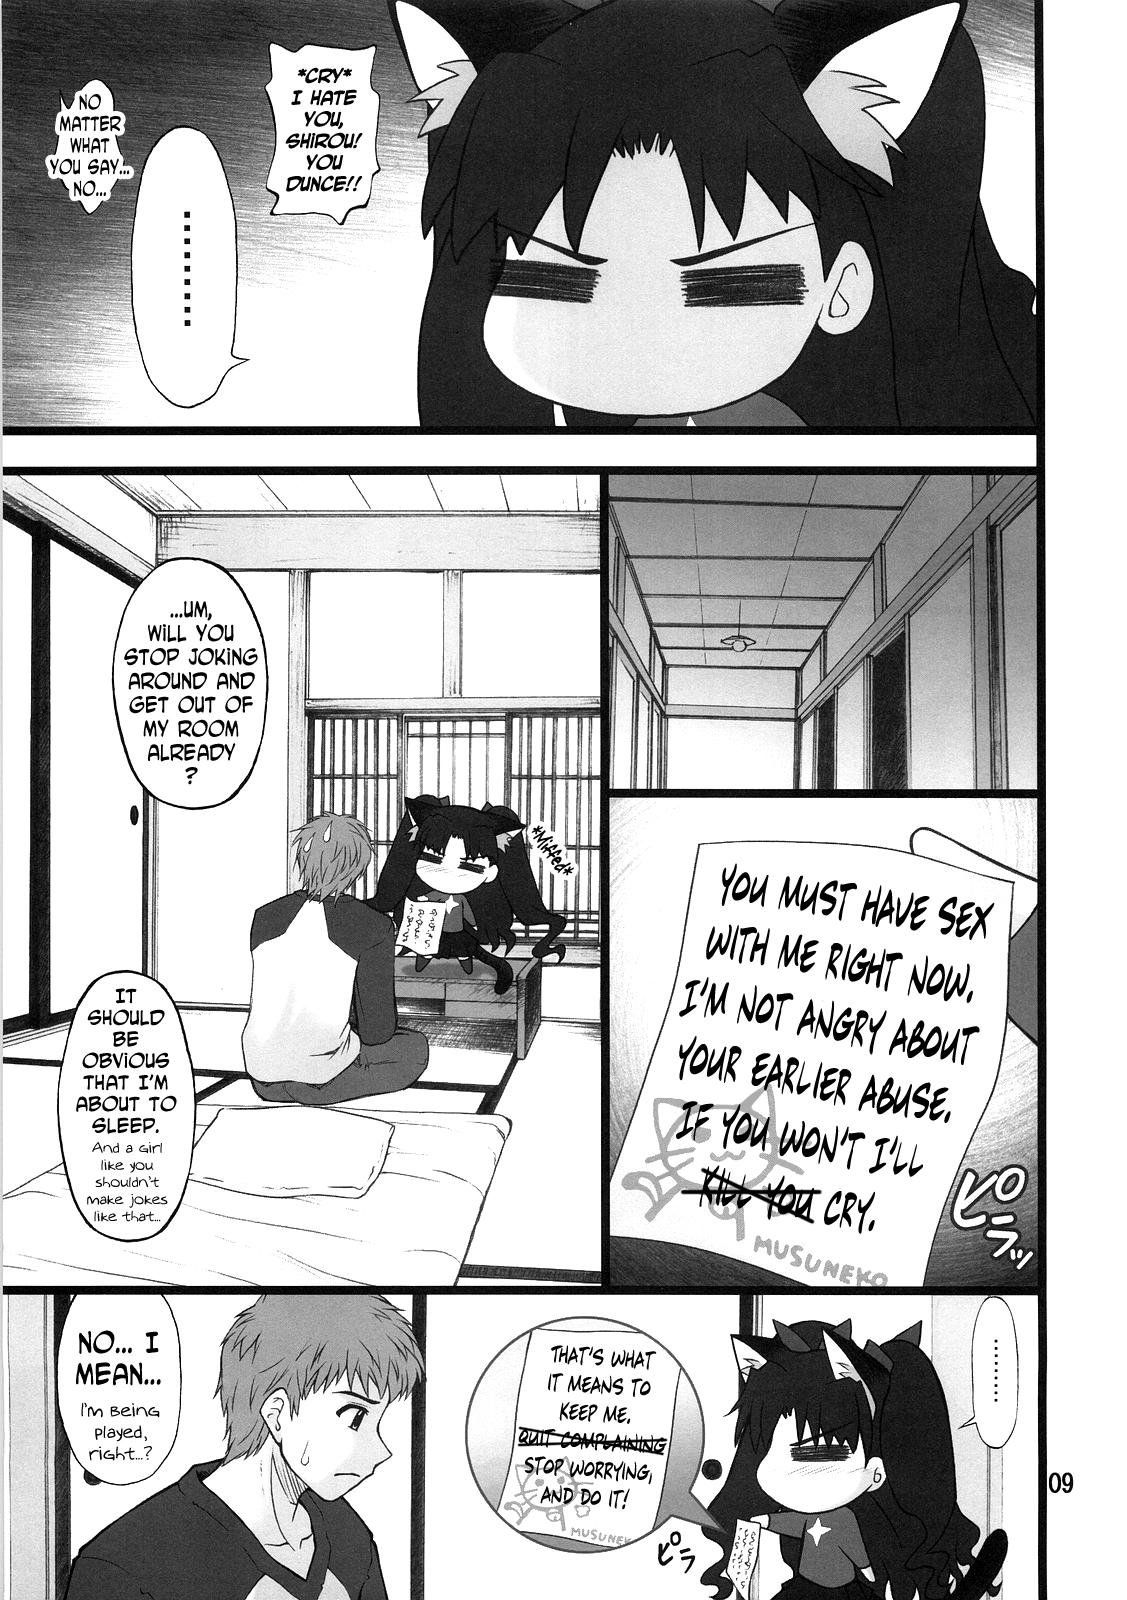 Huge Dick Grem-Rin 1 - Fate stay night Workout - Page 8